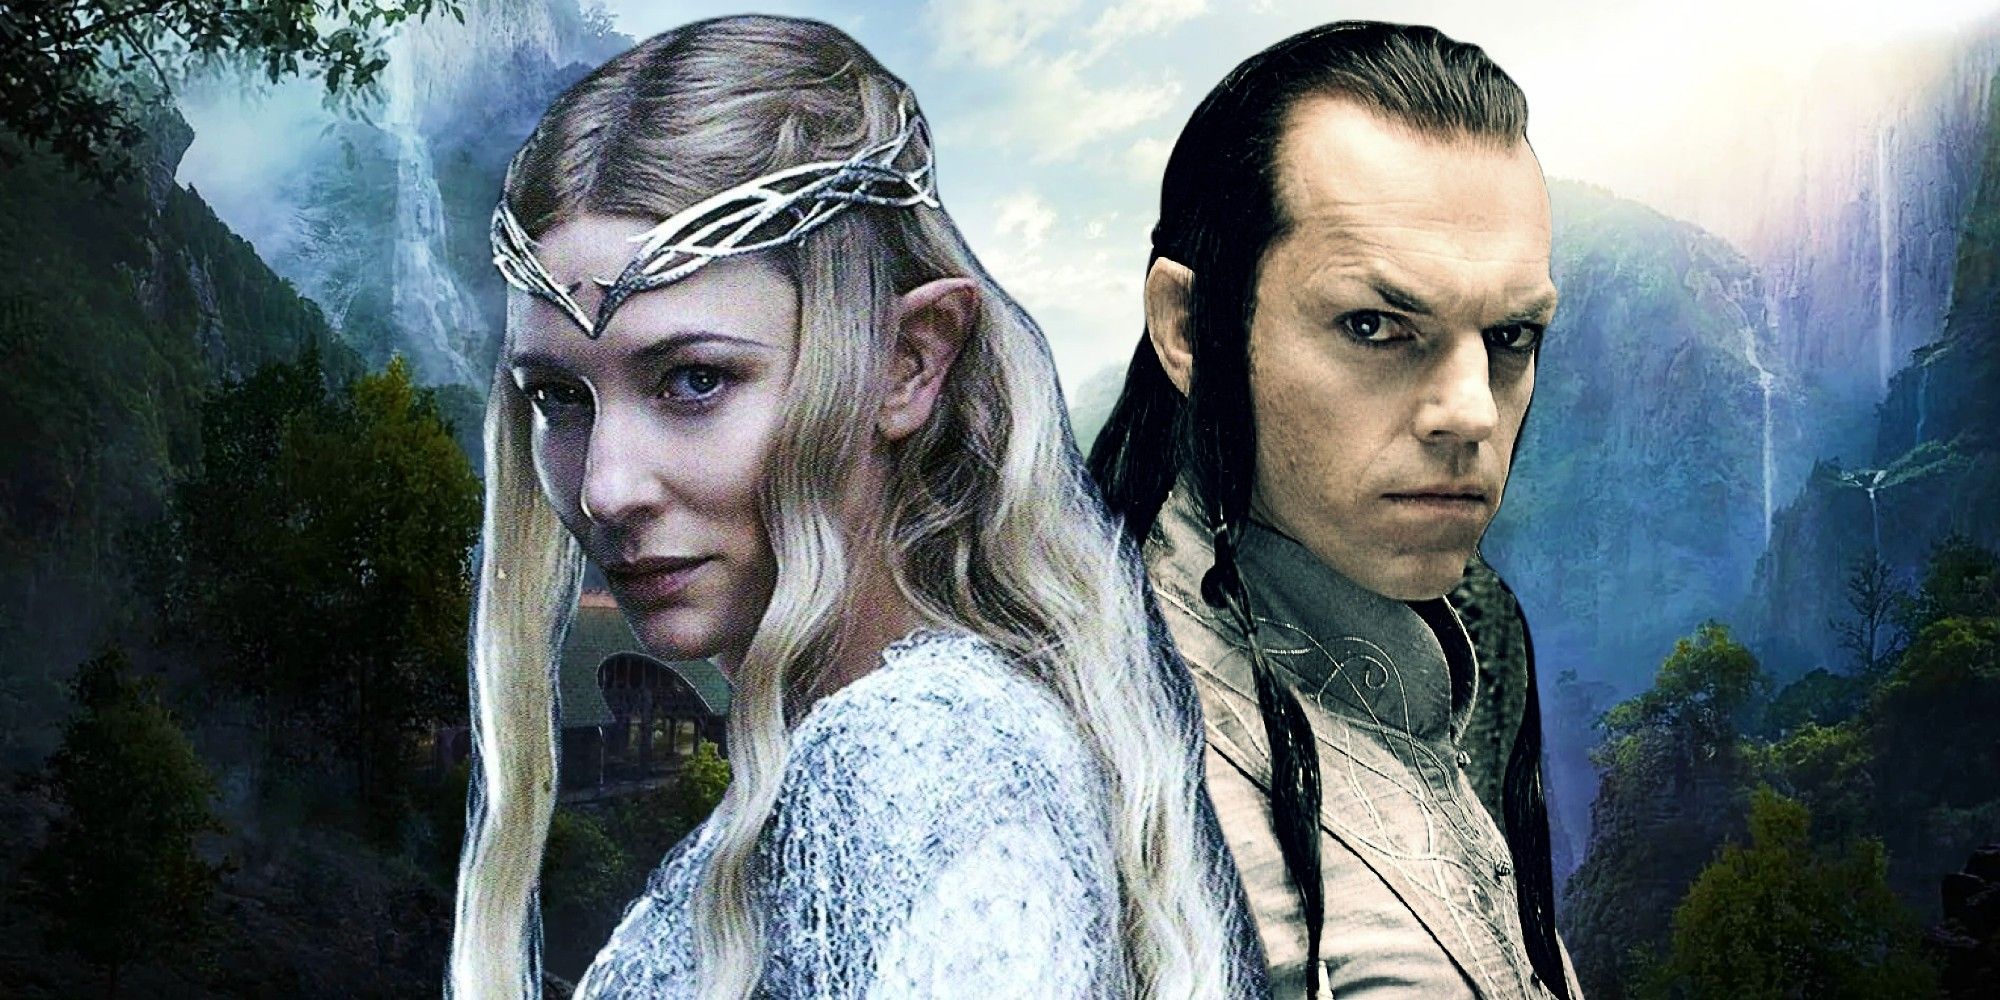 Galadriel-Elrond-Lord-of-the-Rings-most-powerful